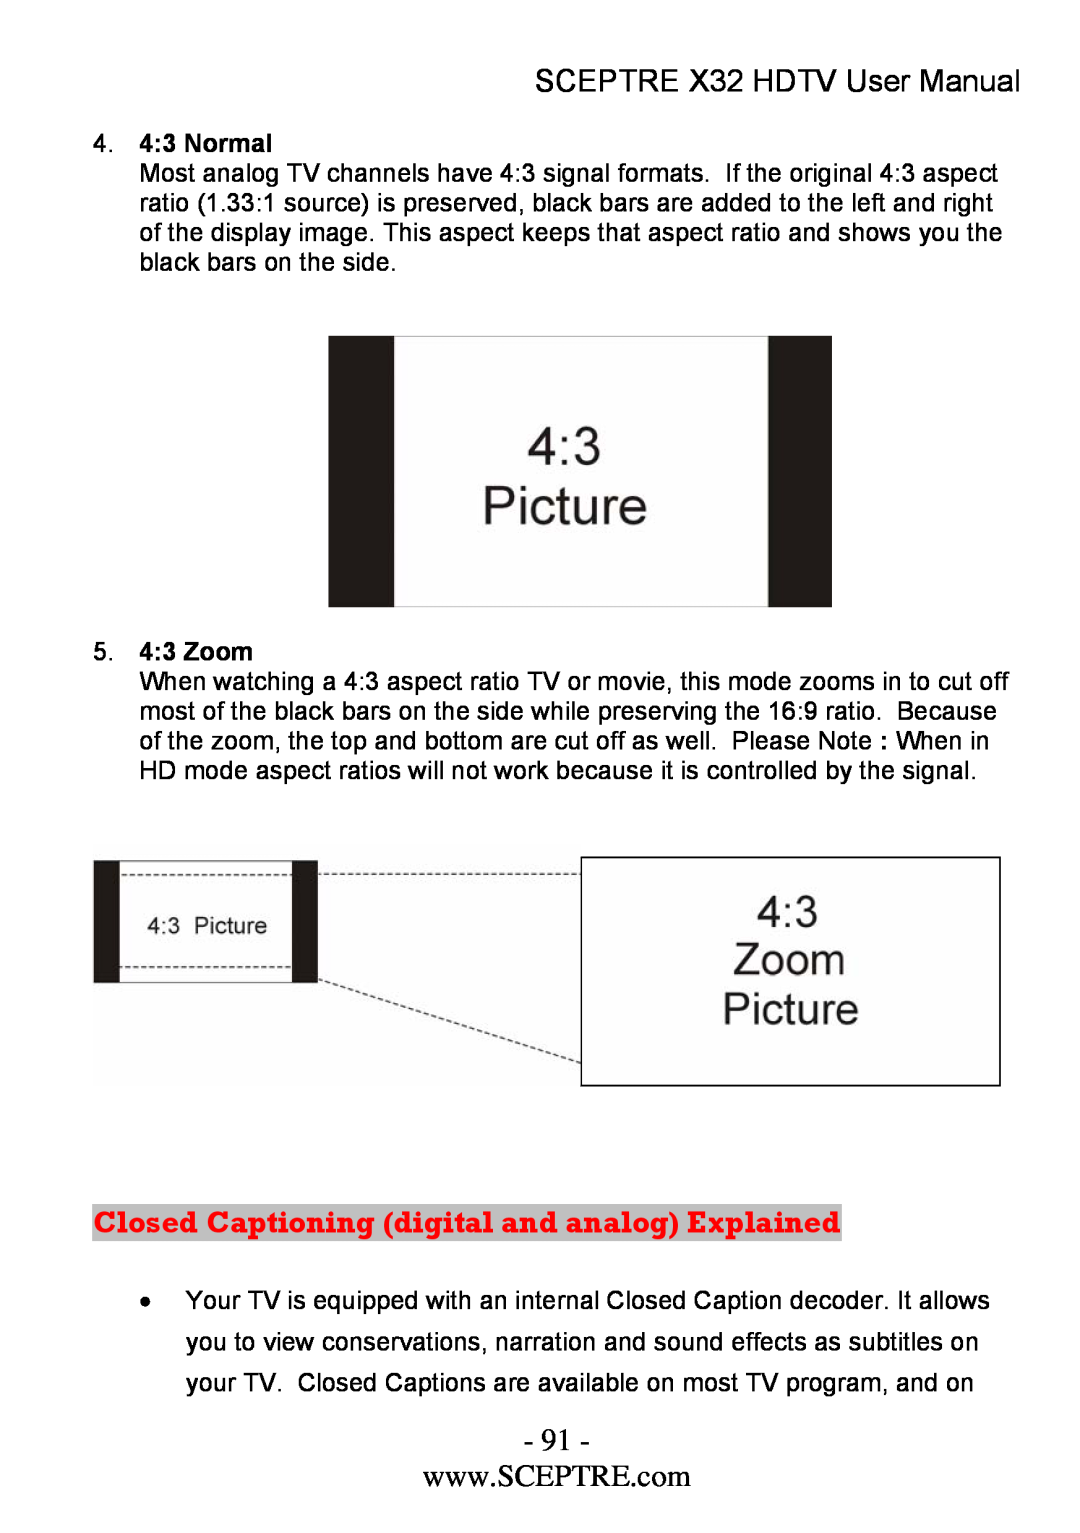 Sceptre Technologies x32 Closed Captioning digital and analog Explained, SCEPTRE X32 HDTV User Manual, 4. 43 Normal 